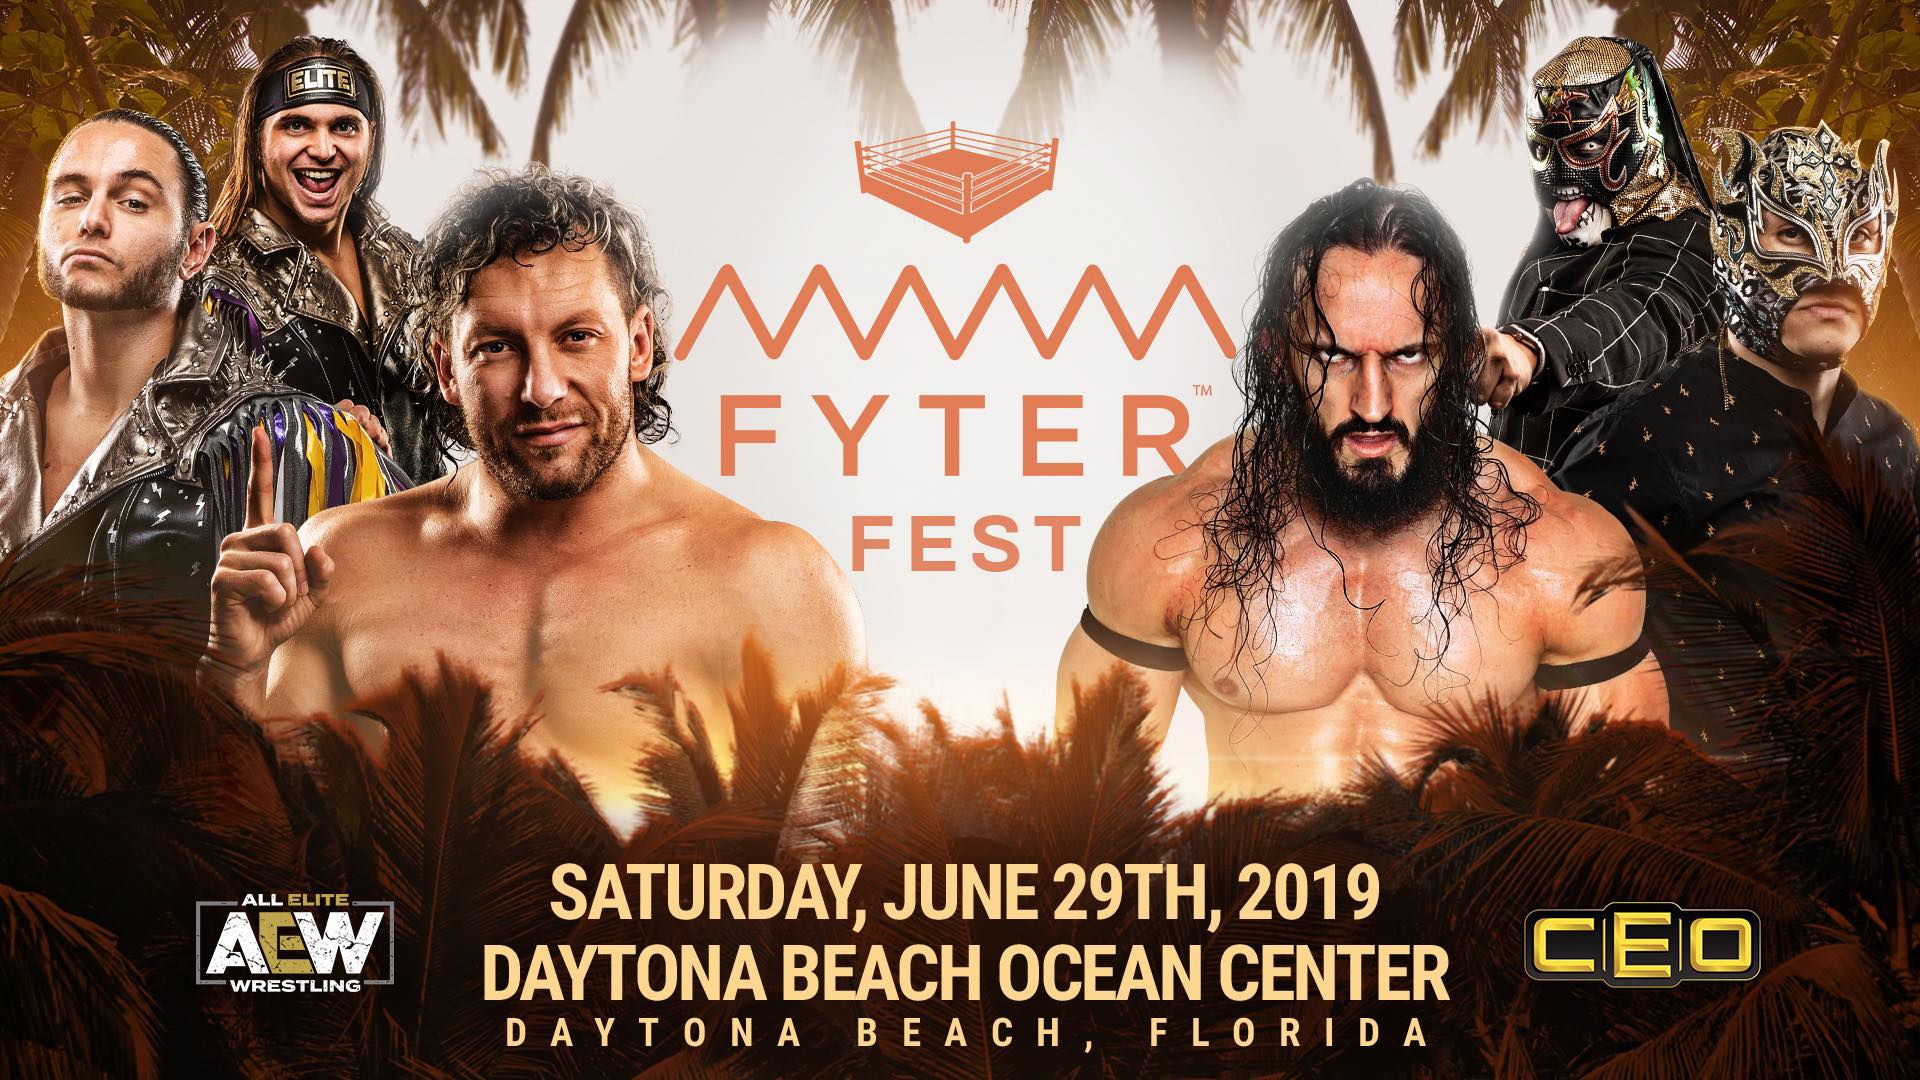 AEW will host an event at Fyter Fest on Saturday, June 29